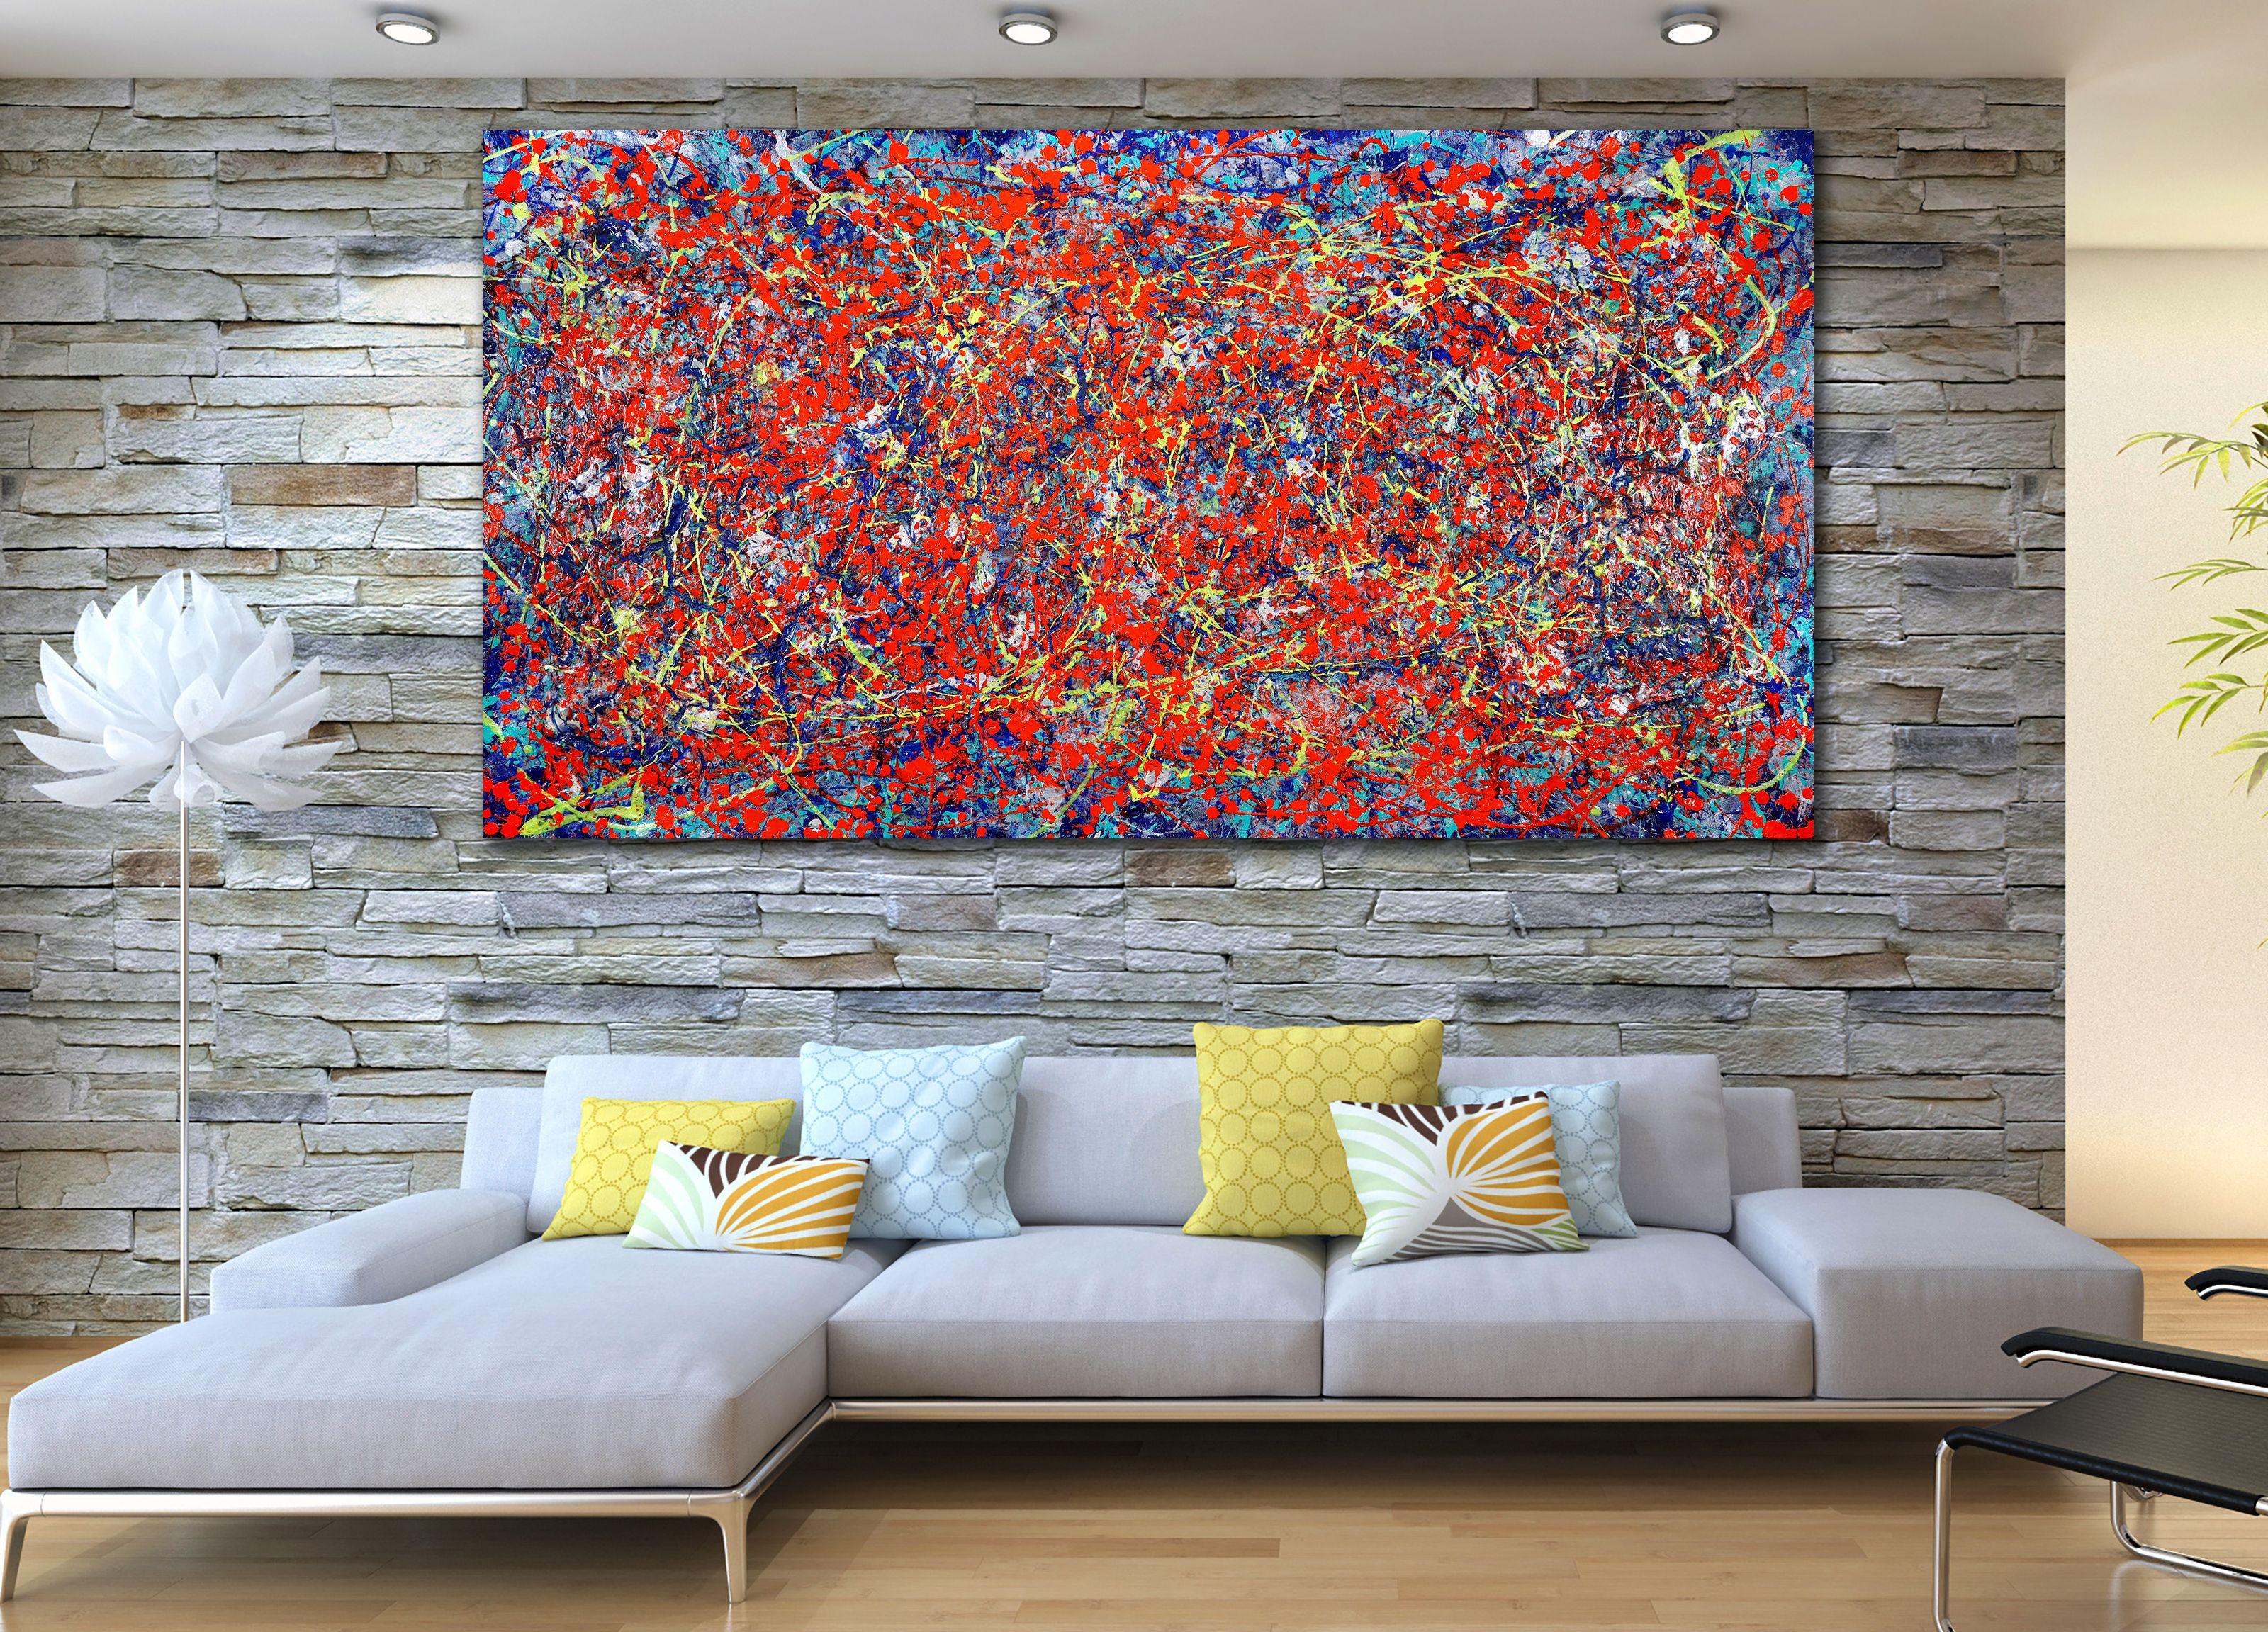 Expressionistic abstract painting with teal, blue, yellow, iridescent clear paint, silver , orange and lots of iridescence. Completed with gestural motion and energy. Can be displayed in multiple orientations. Signed on the back or front on request.